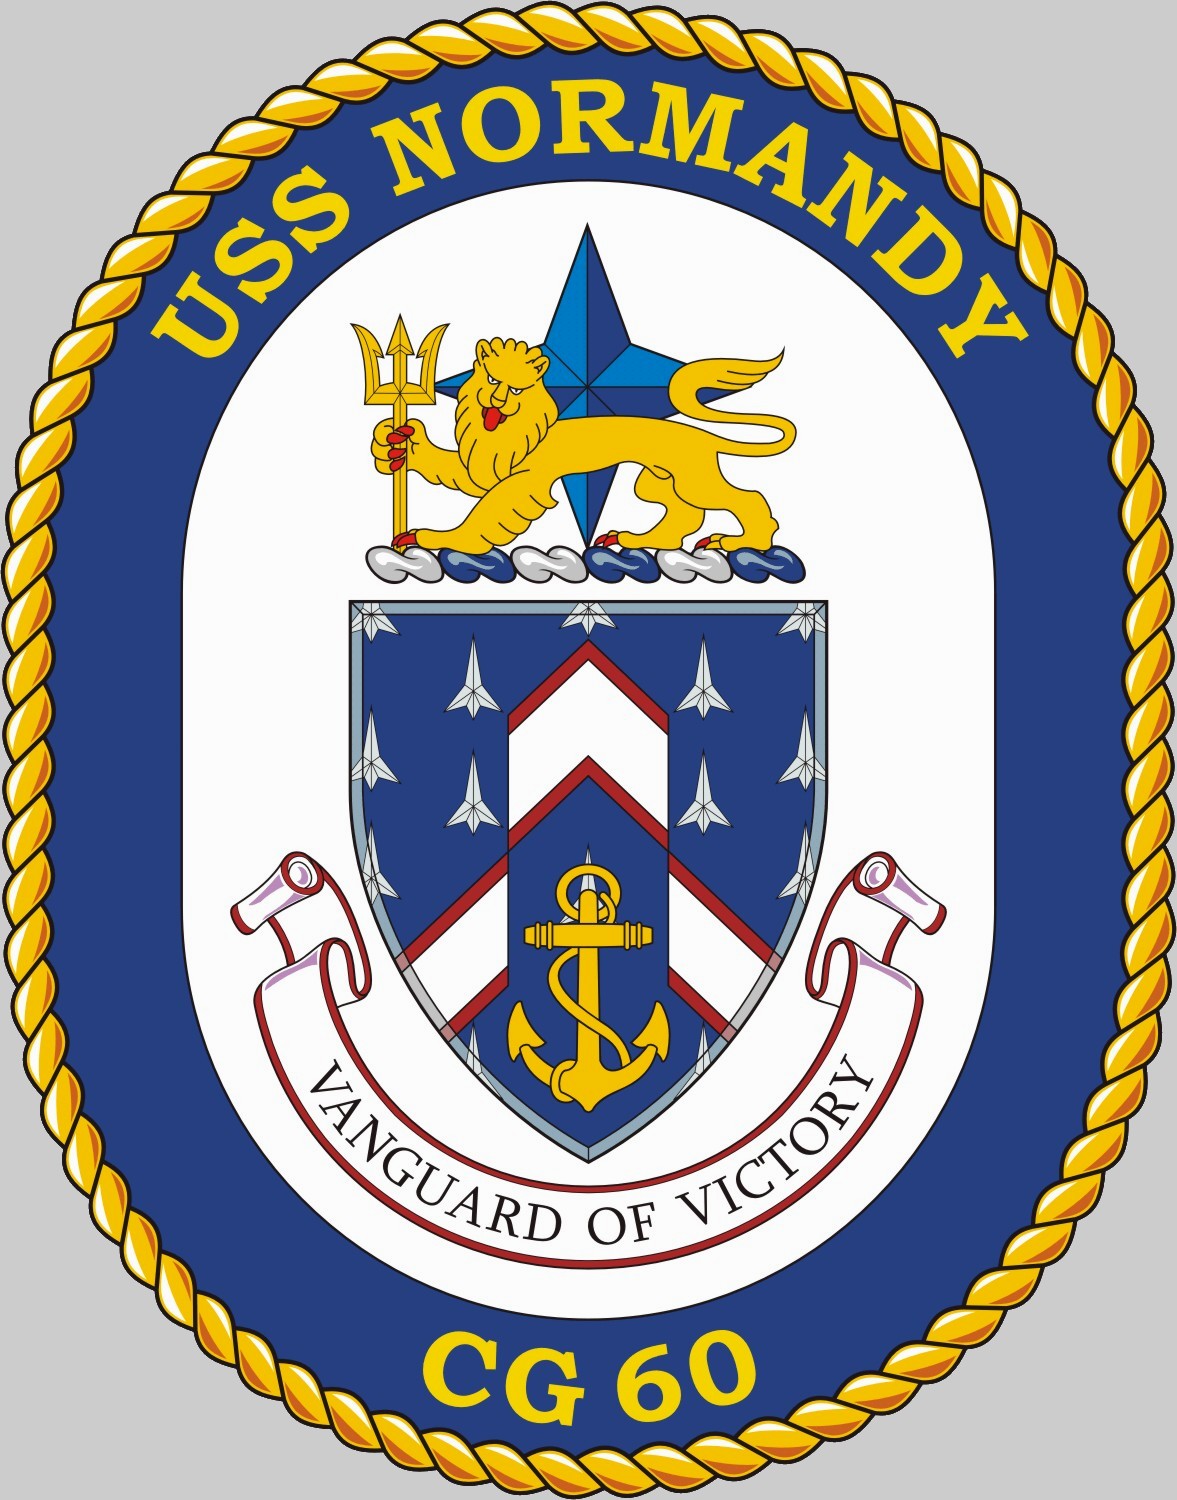 cg-60 uss normandy insignia crest patch badge ticonderoga class guided missile cruiser aegis us navy 02c